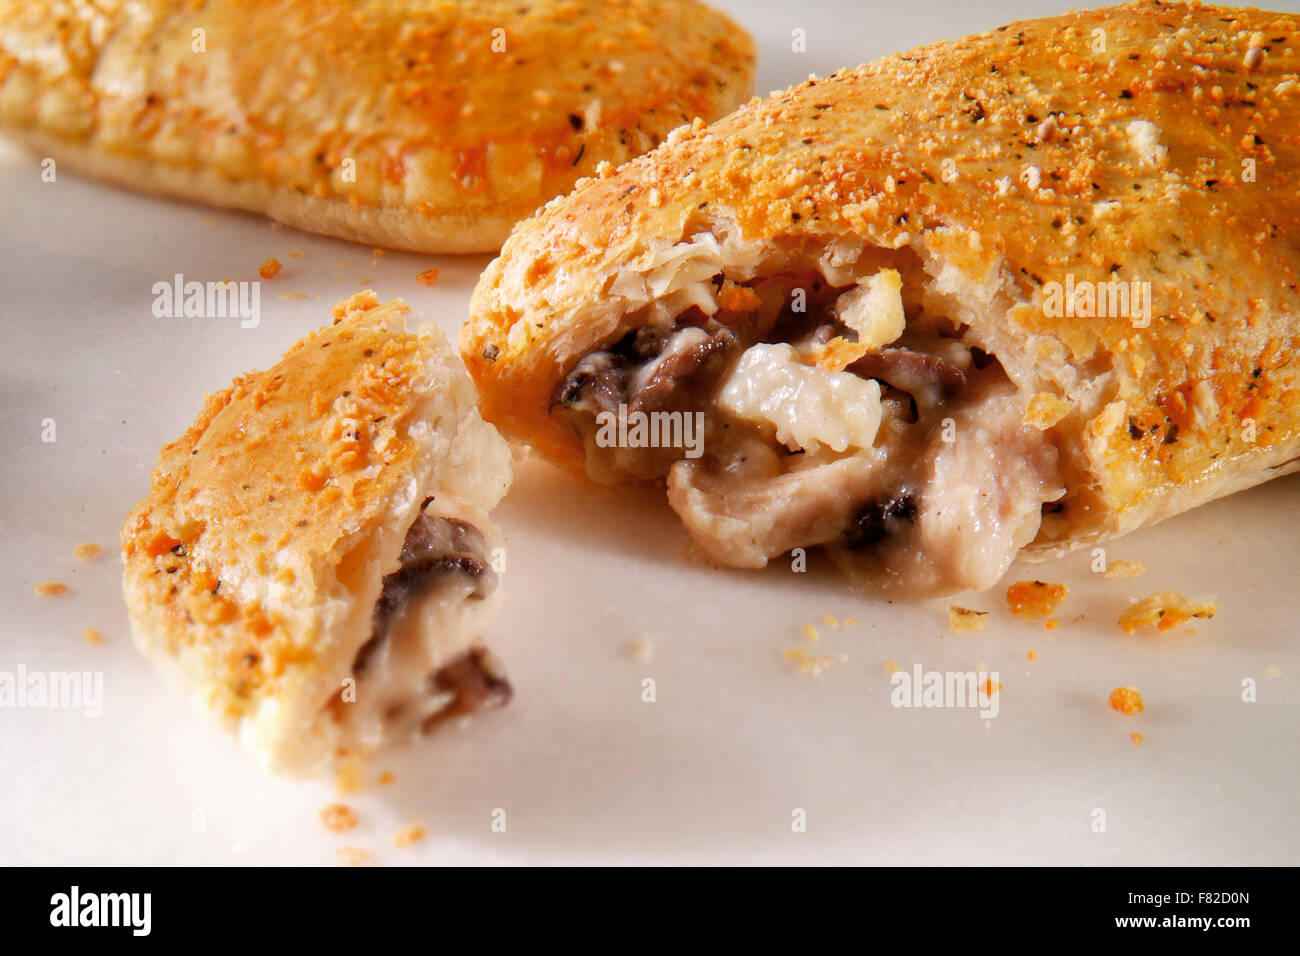 Cooked chicken & mushroom puff pastry slice cut open against a white background Stock Photo